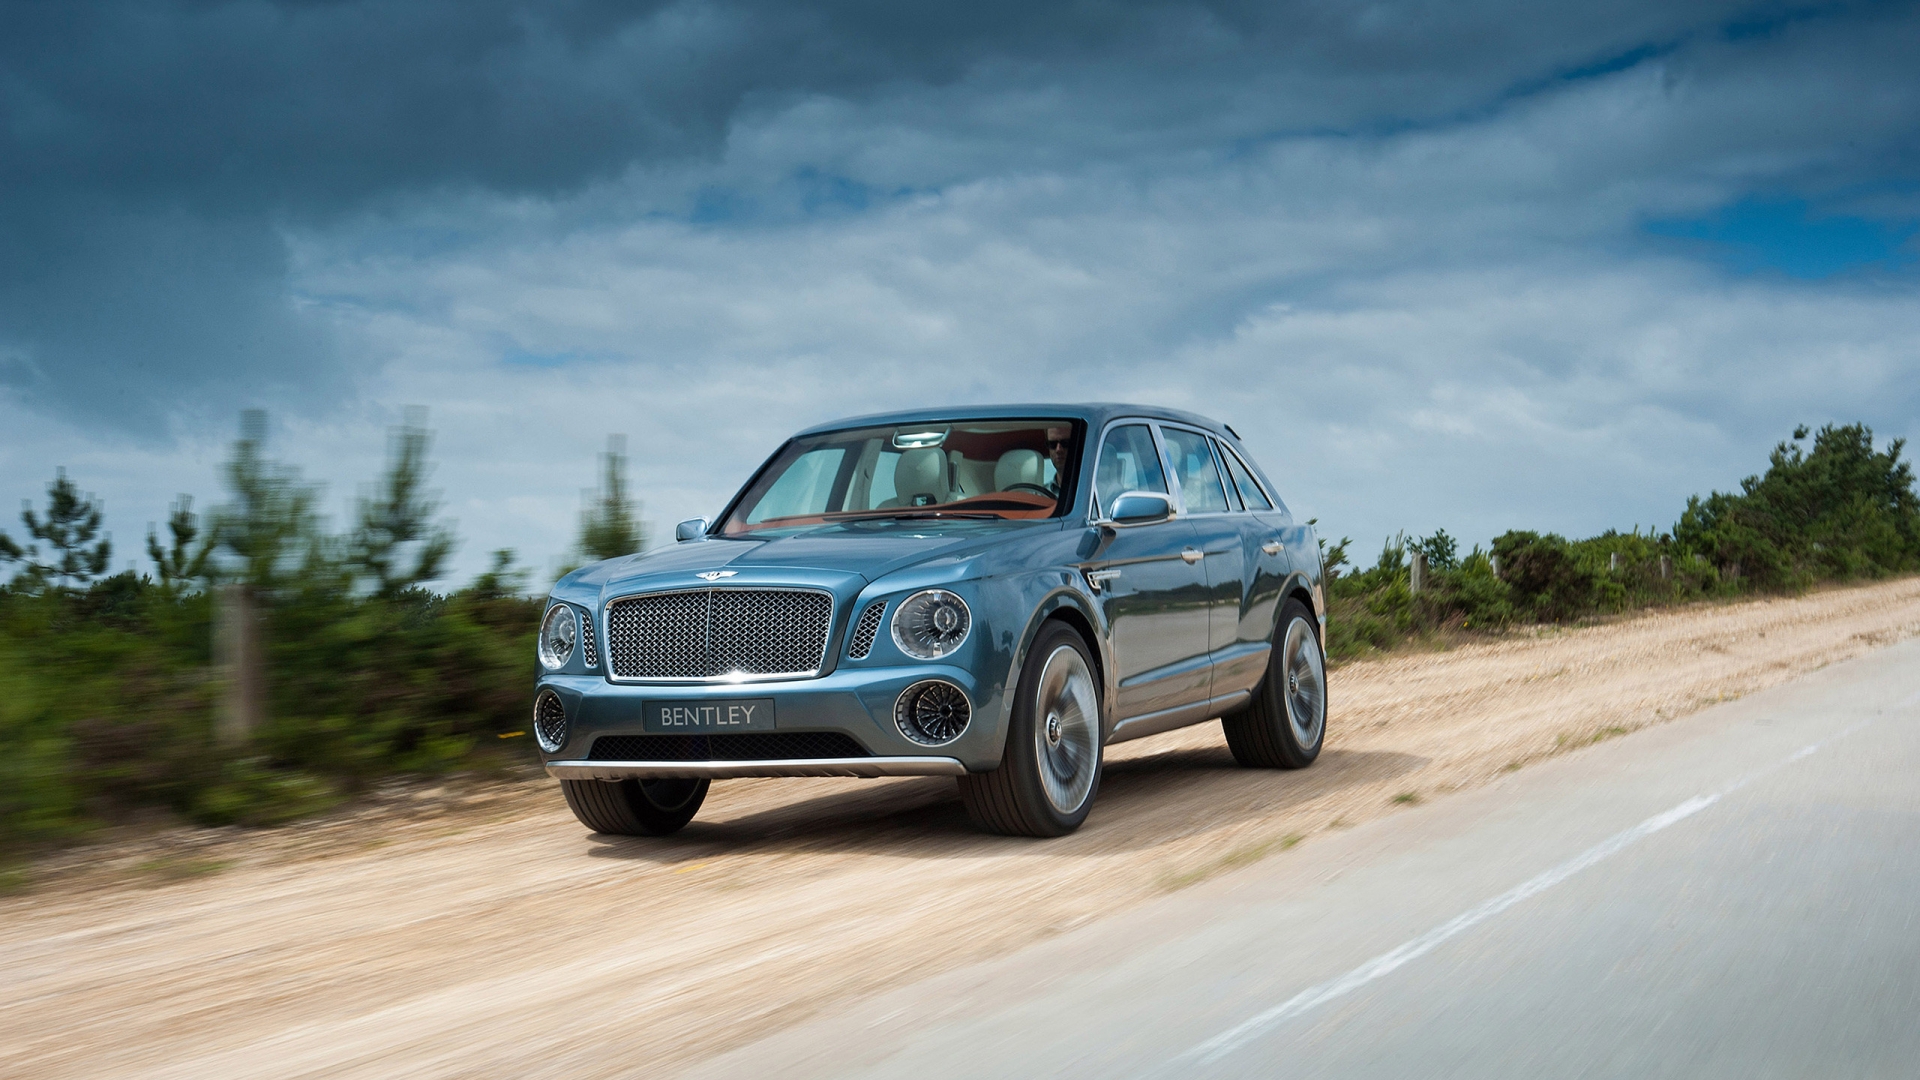 Amazing Bentley SUV Concept for 1920 x 1080 HDTV 1080p resolution